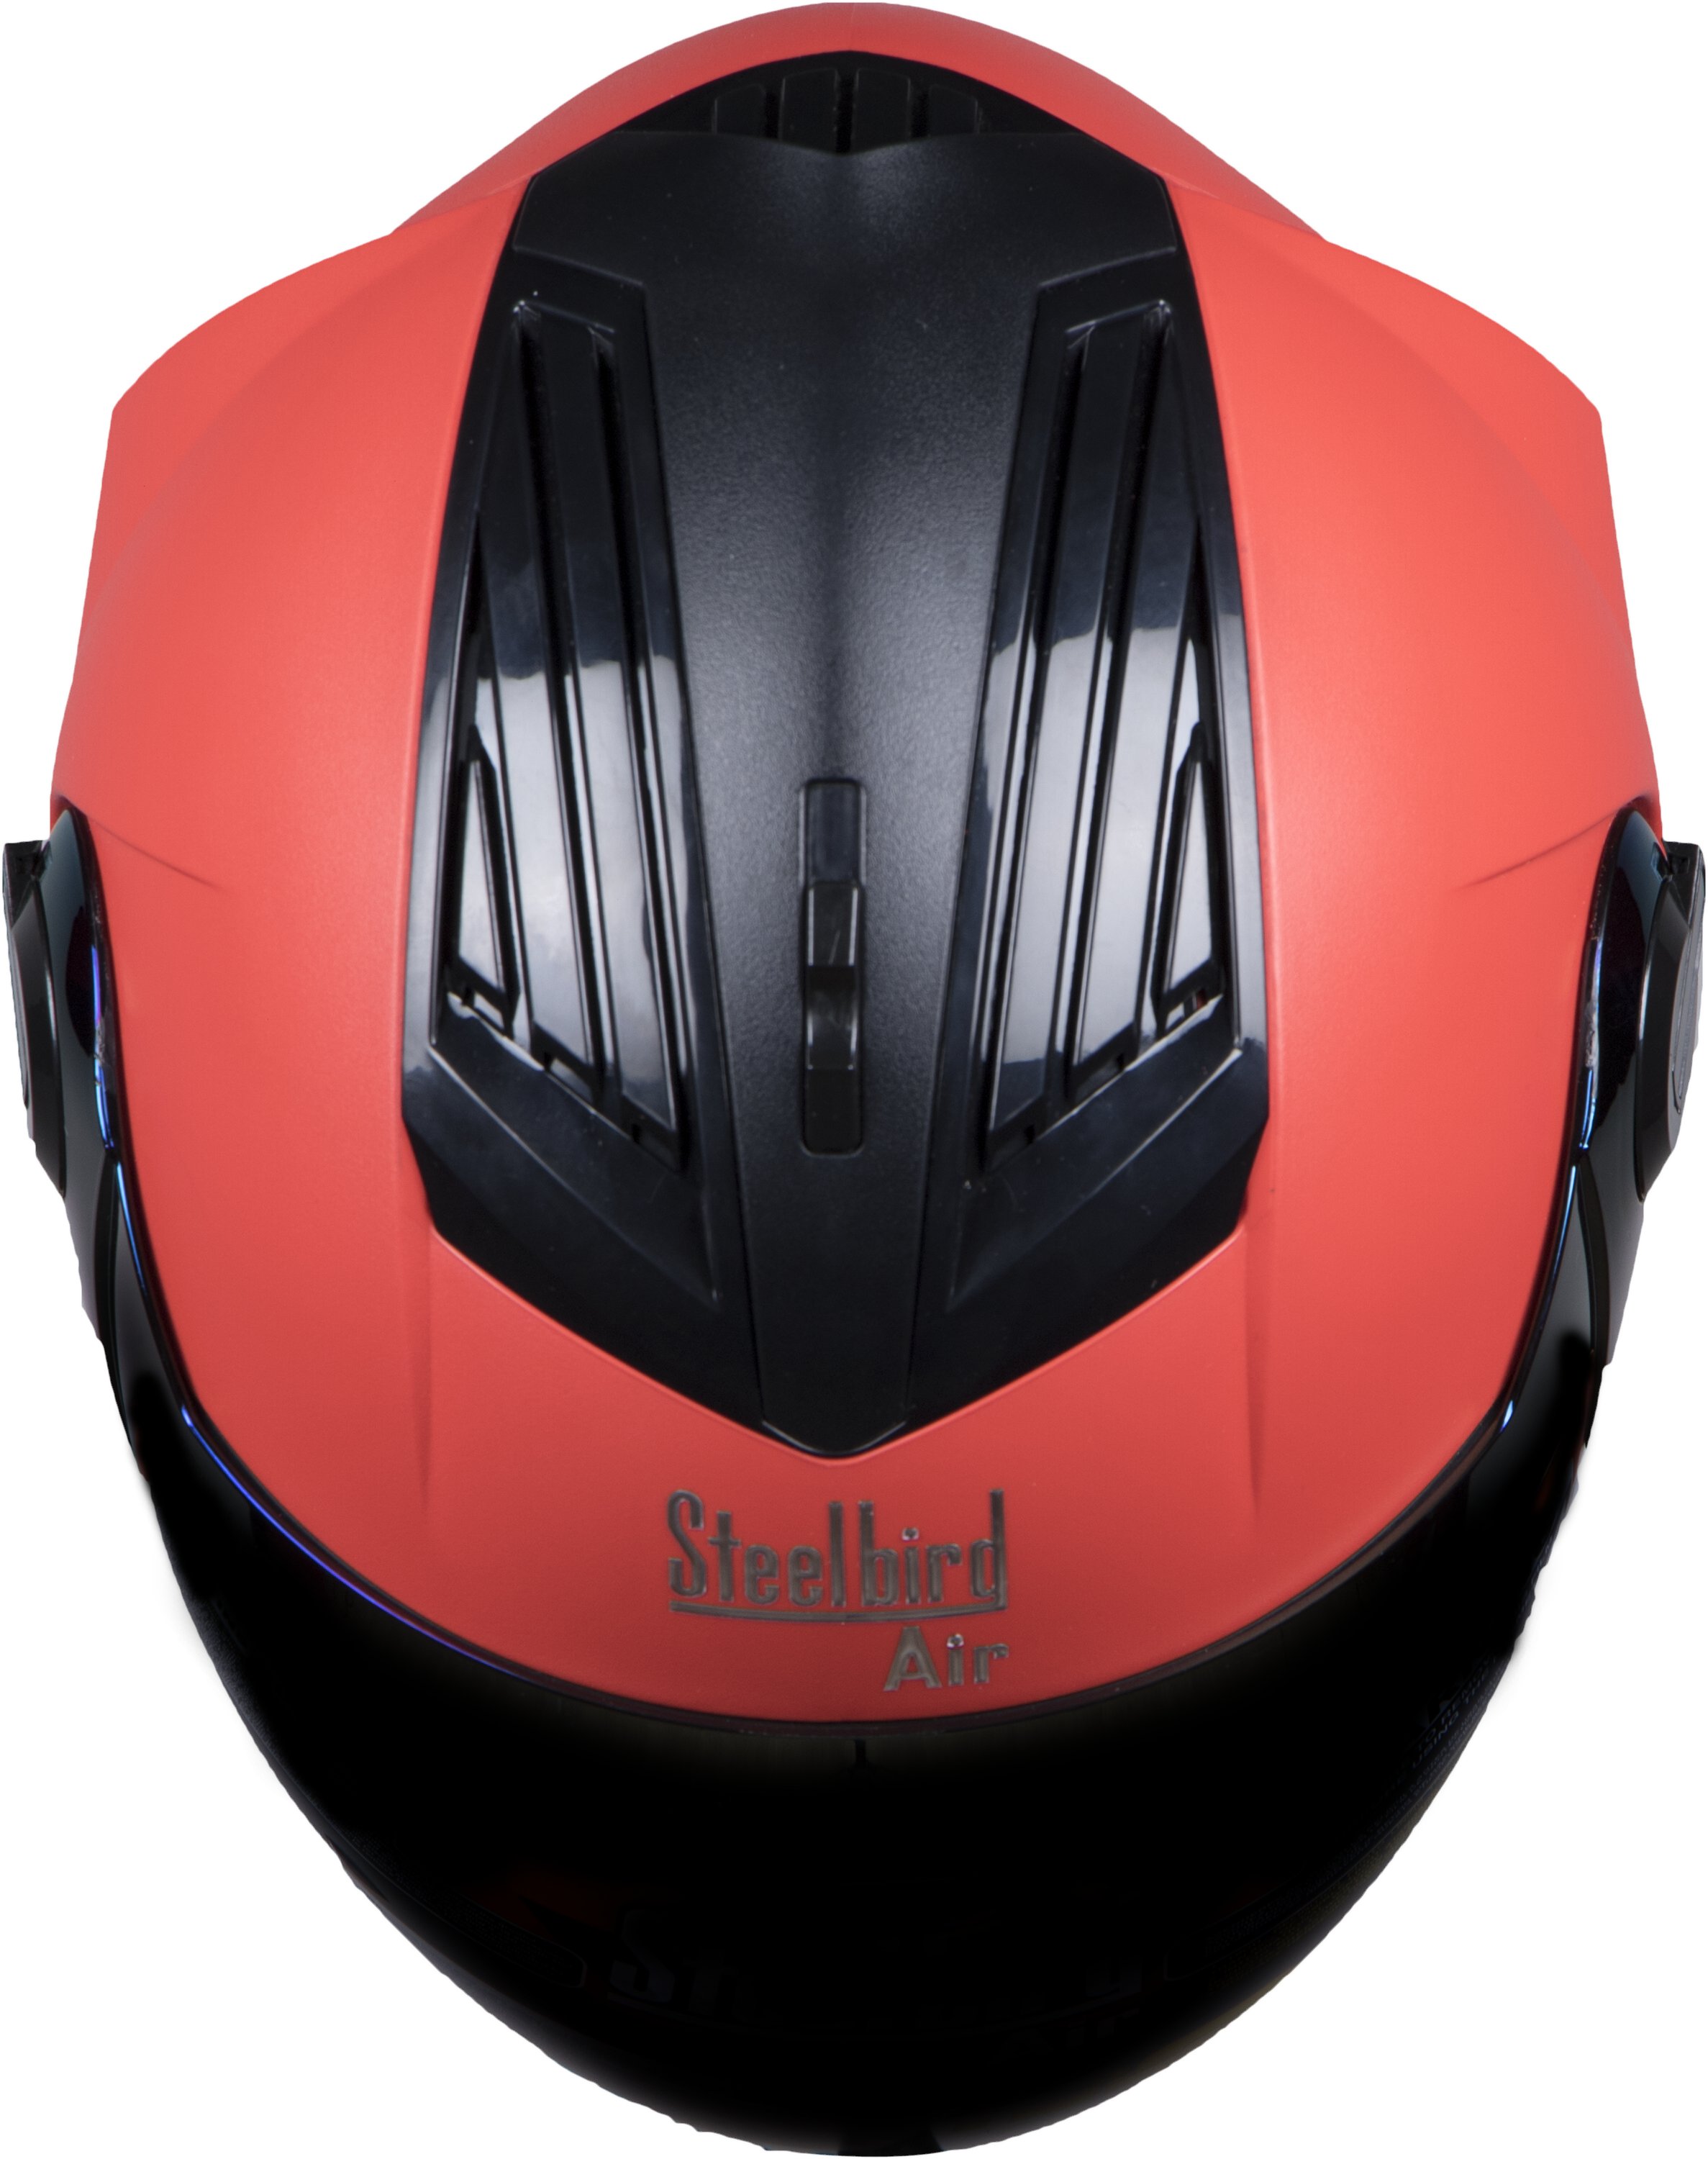 SBA-2 DASHING RED ( Fitted With Clear Visor Extra Gold Chrome Visor Free)